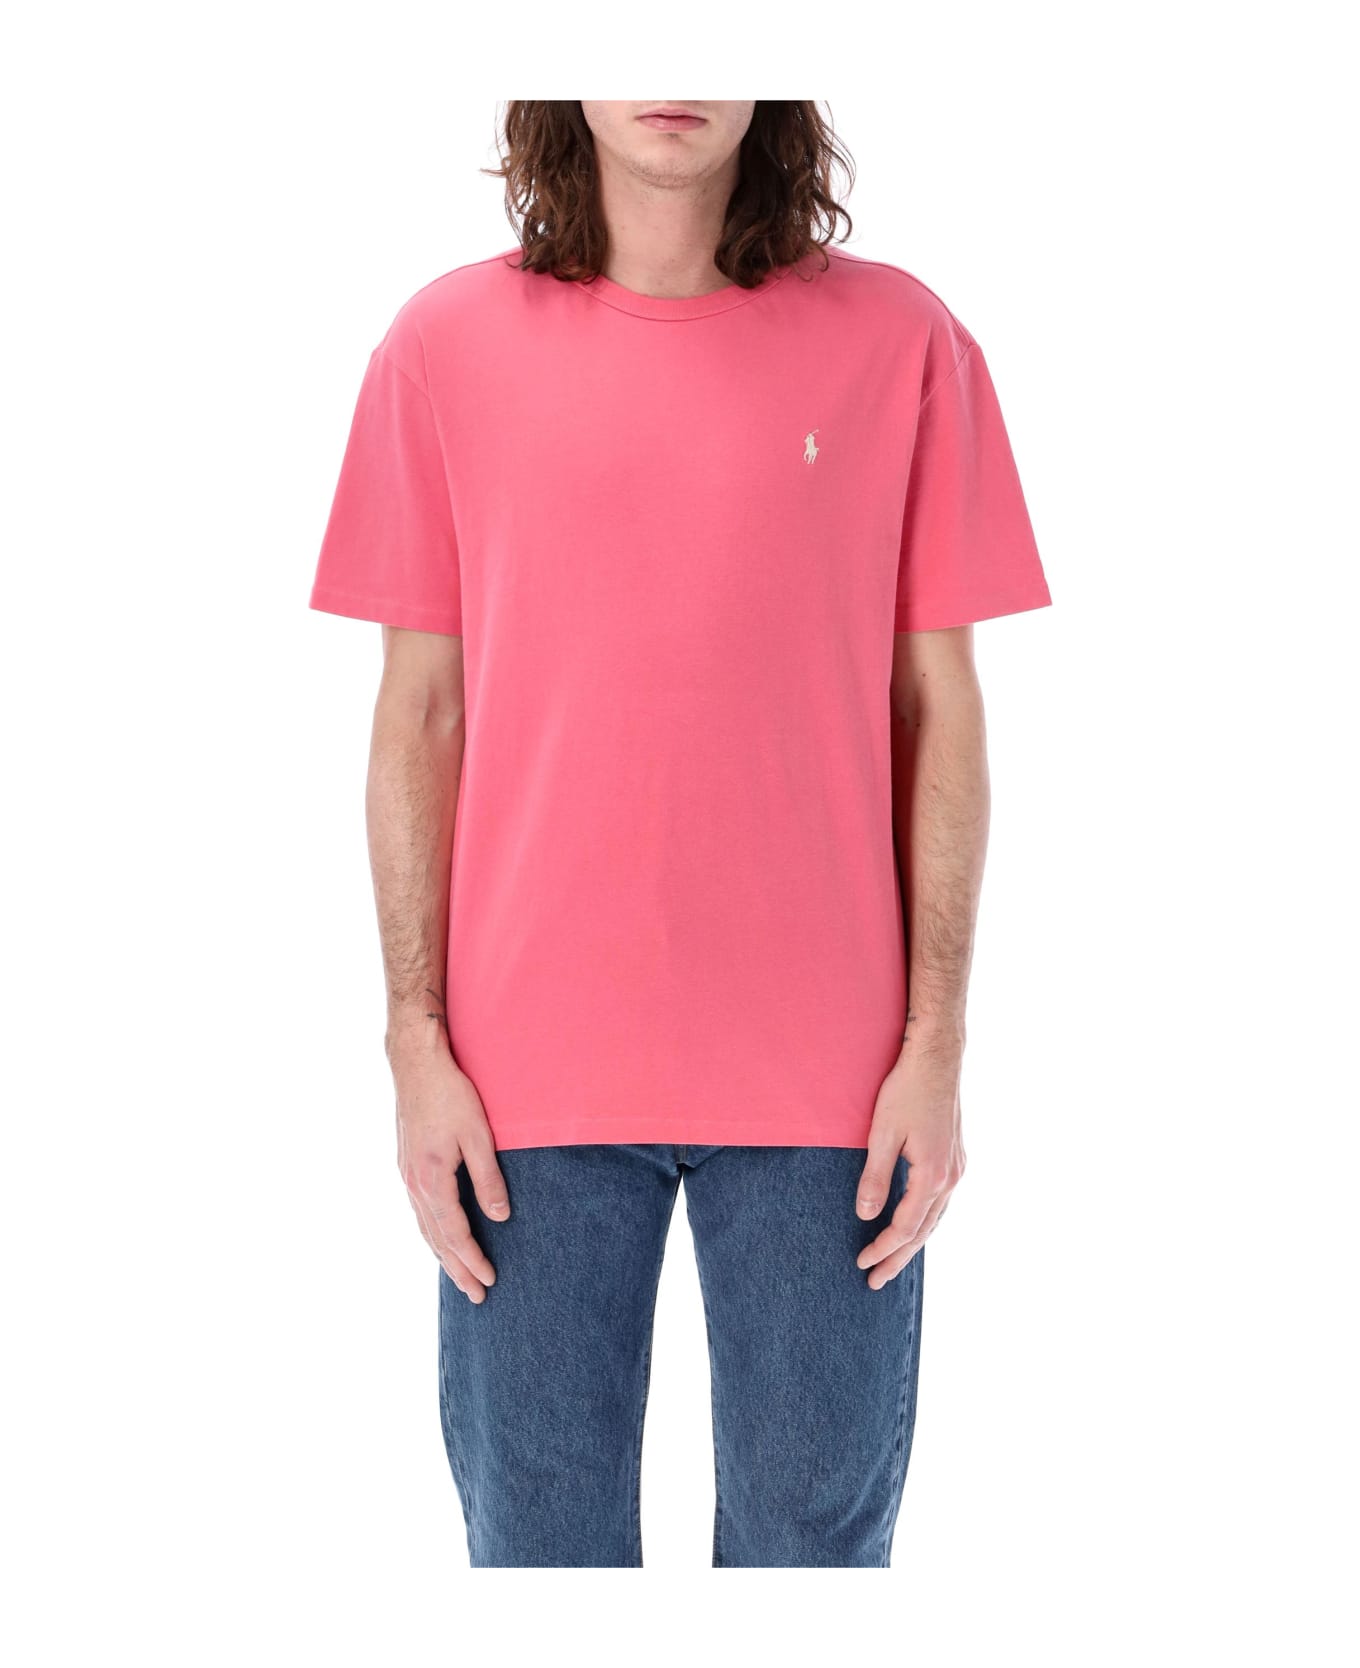 Polo Ralph Lauren Classic Tee - PALE RED